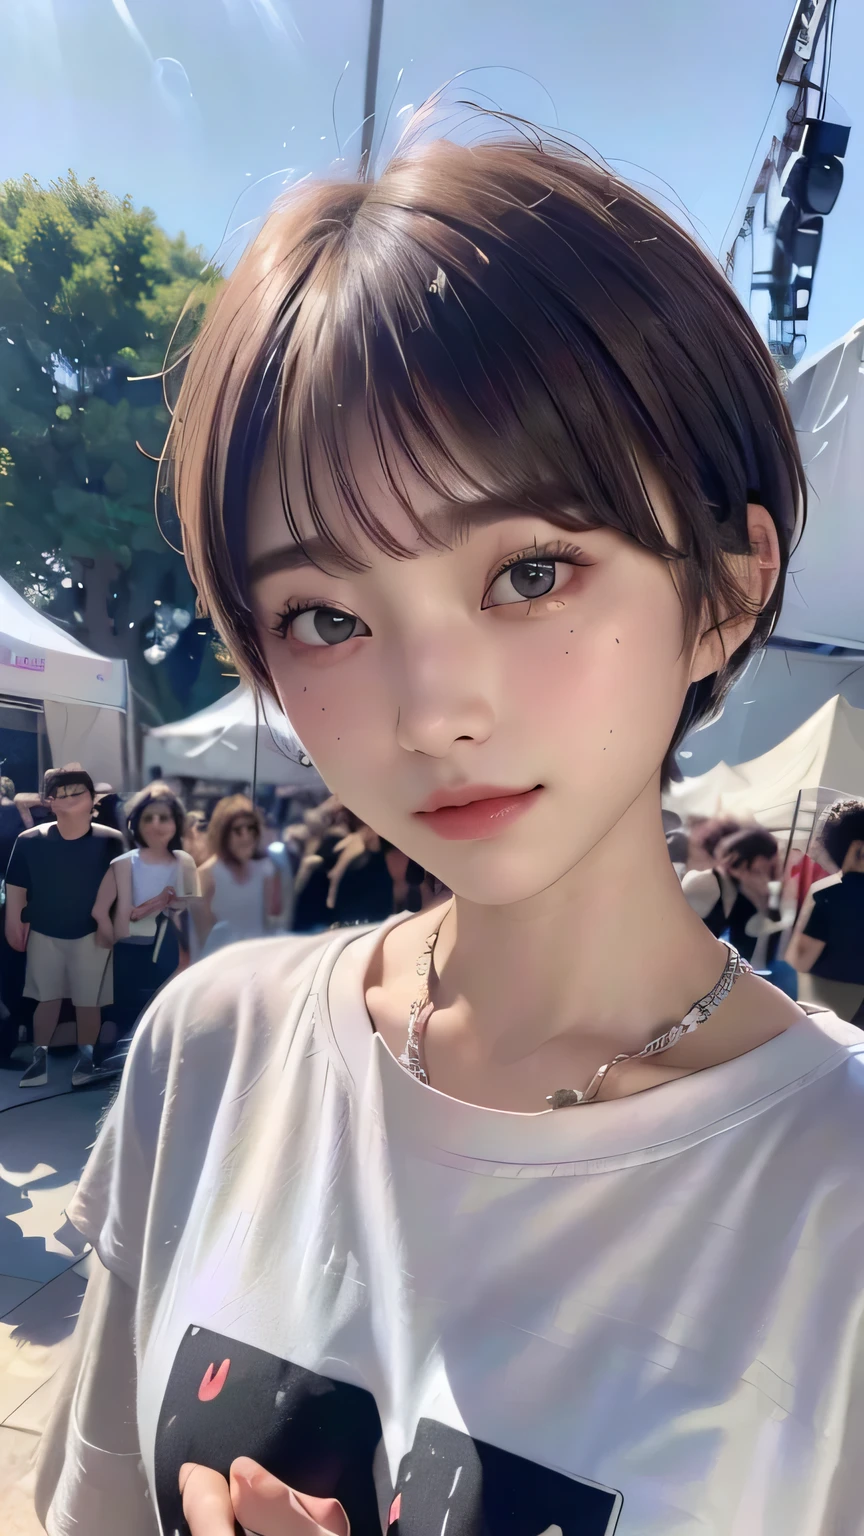 (Highest quality:1.3)、(Masterpiece:1.4)、Raw photo、、((Best image quality))、 ((High resolution))、Beautiful face in every detail、Realistic human skin、(Cute natural anime face)、(One Woman:1.3)、Realistic、Photorealistic、short hair、(Beautiful woman)、((Cool Japan girl))、(boyish:1.5)、mannish、((Beautiful woman))、(Beautiful Hair)、((Dark brown hair))、(Blushing:1.35)、(Fashion Model:1.3)、(Every woman admires her face:1.3)、((Her eyes are big))、 year old beauty、(Small face)、Small Head、((Long neck))、(Music Festival:1.3)、(Concert T-shirts:1.3)、(Oversized clothing:1.3)、necklace、(Featured Musicians:1.3)、((The aspirations of young people))、Attractive lips、[smile]、((Everyone's eyes are captured))